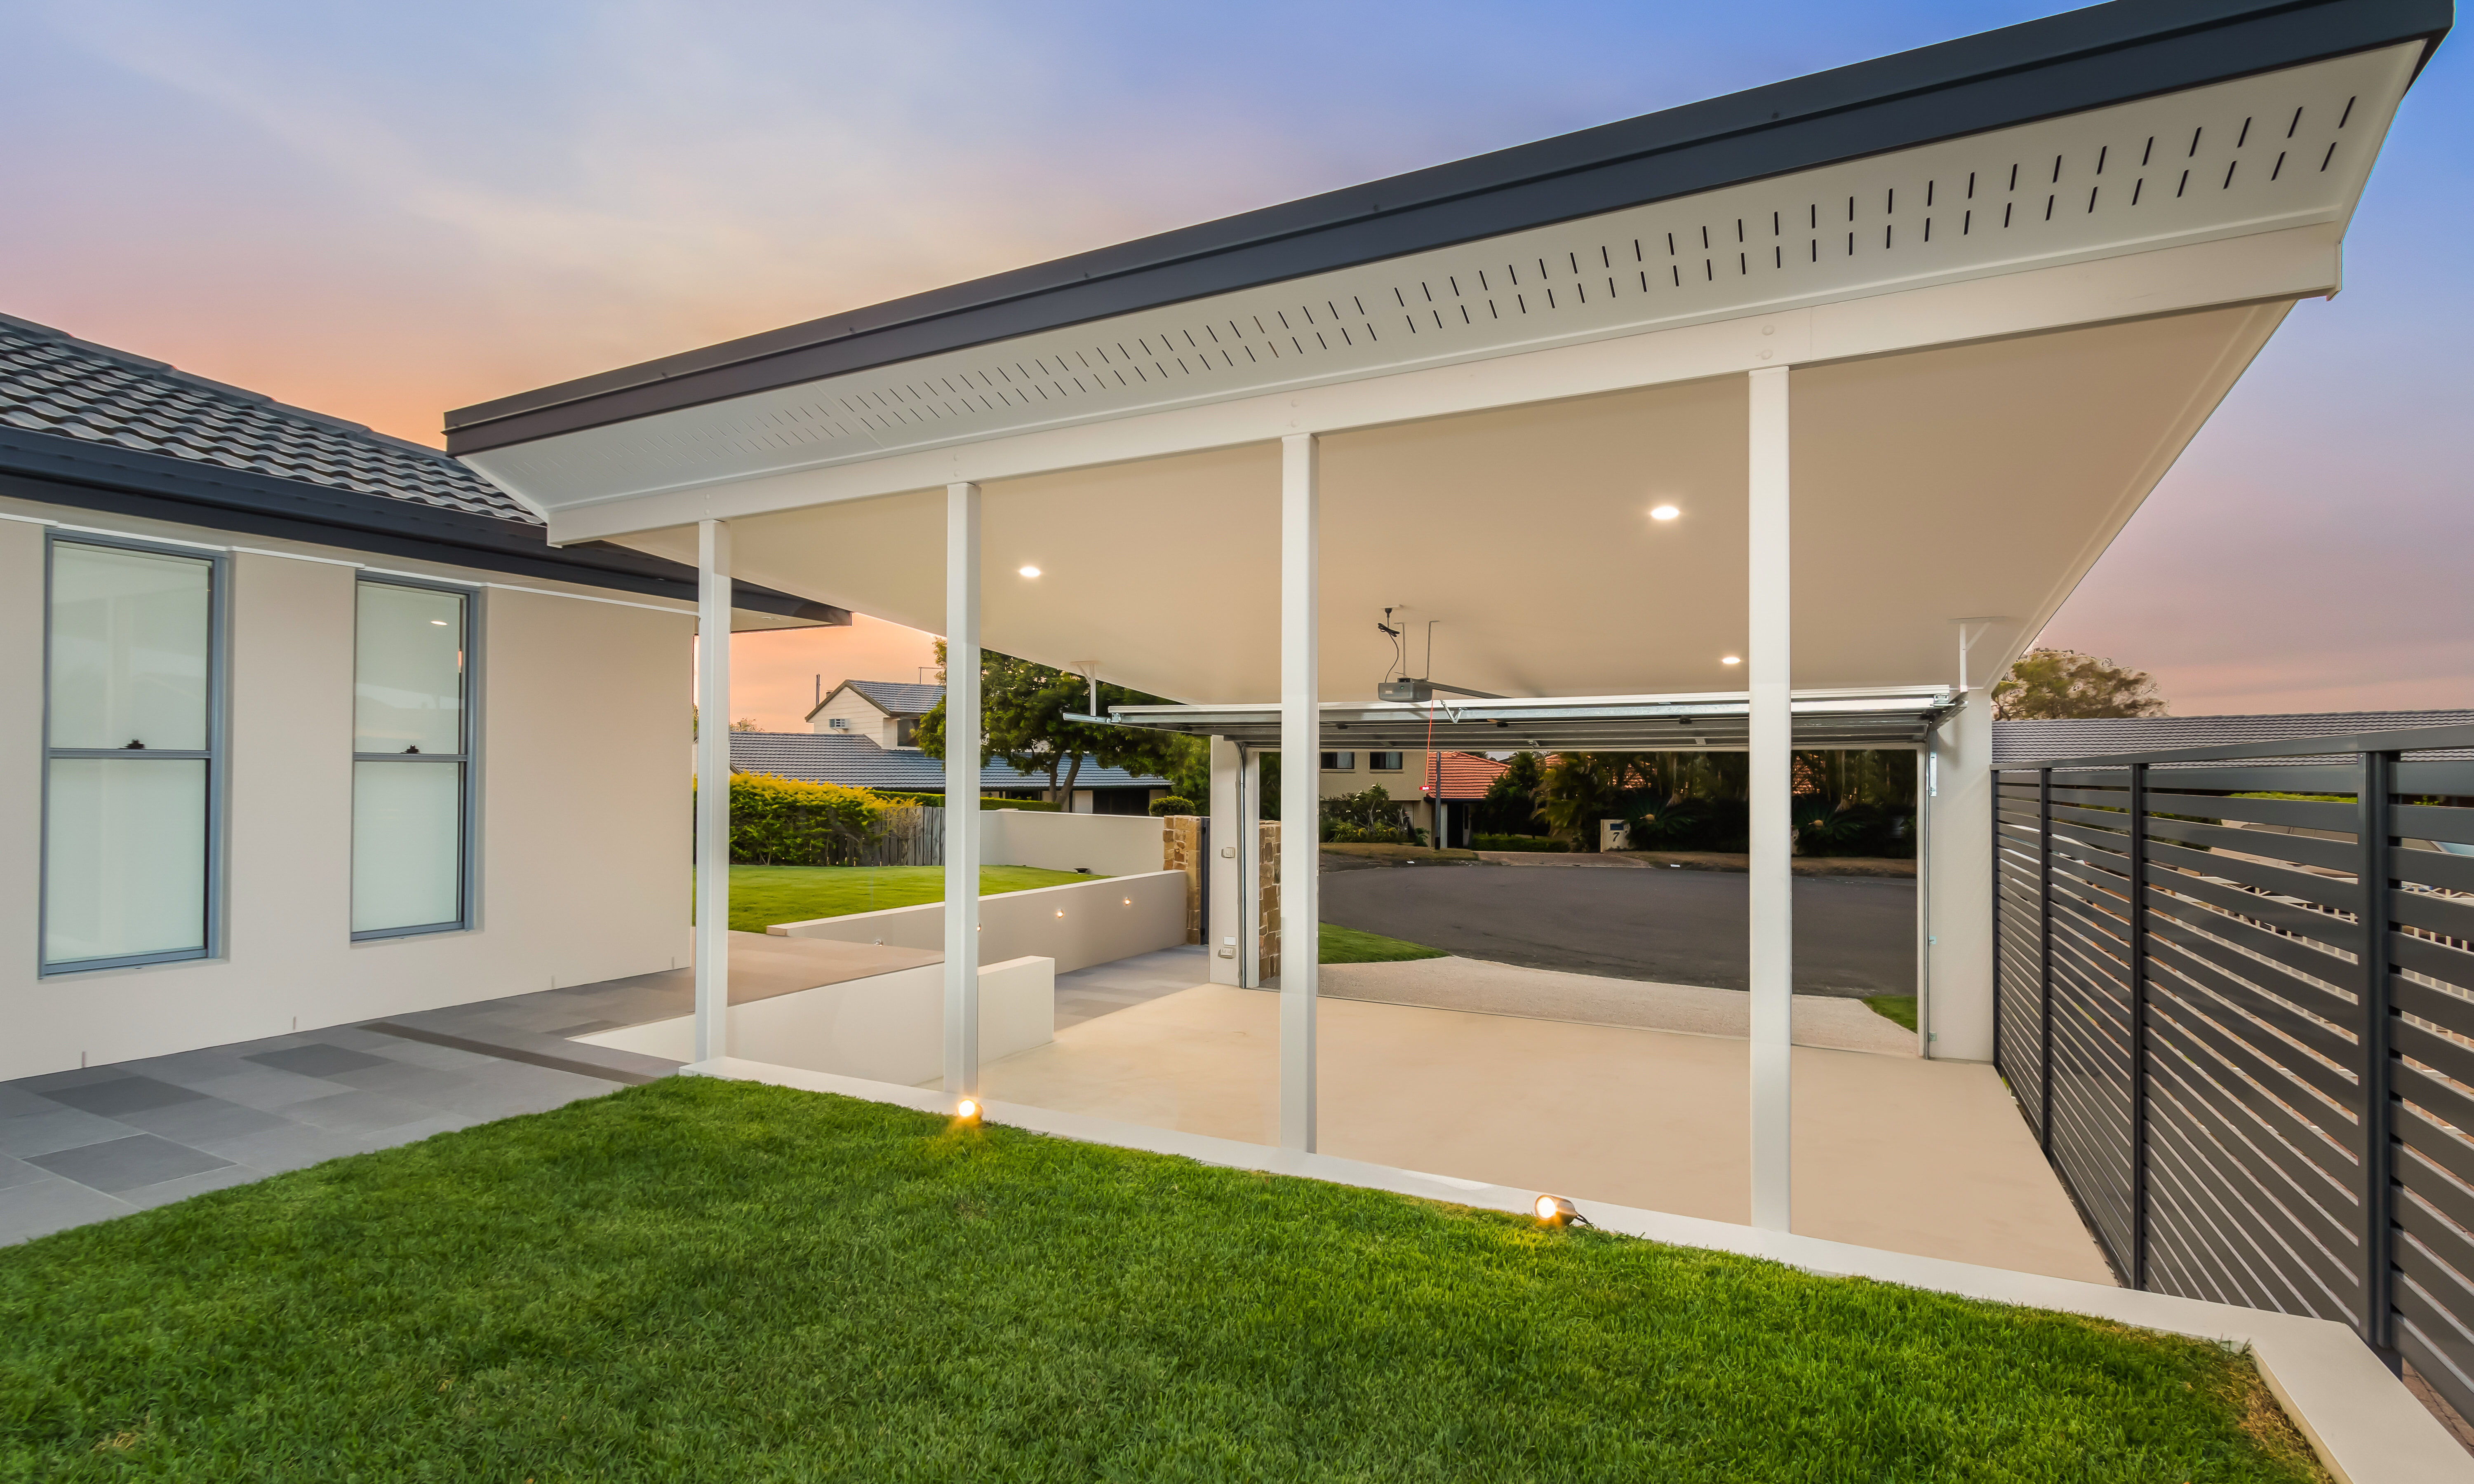 Double carport and front entry, exposed concrete driveway